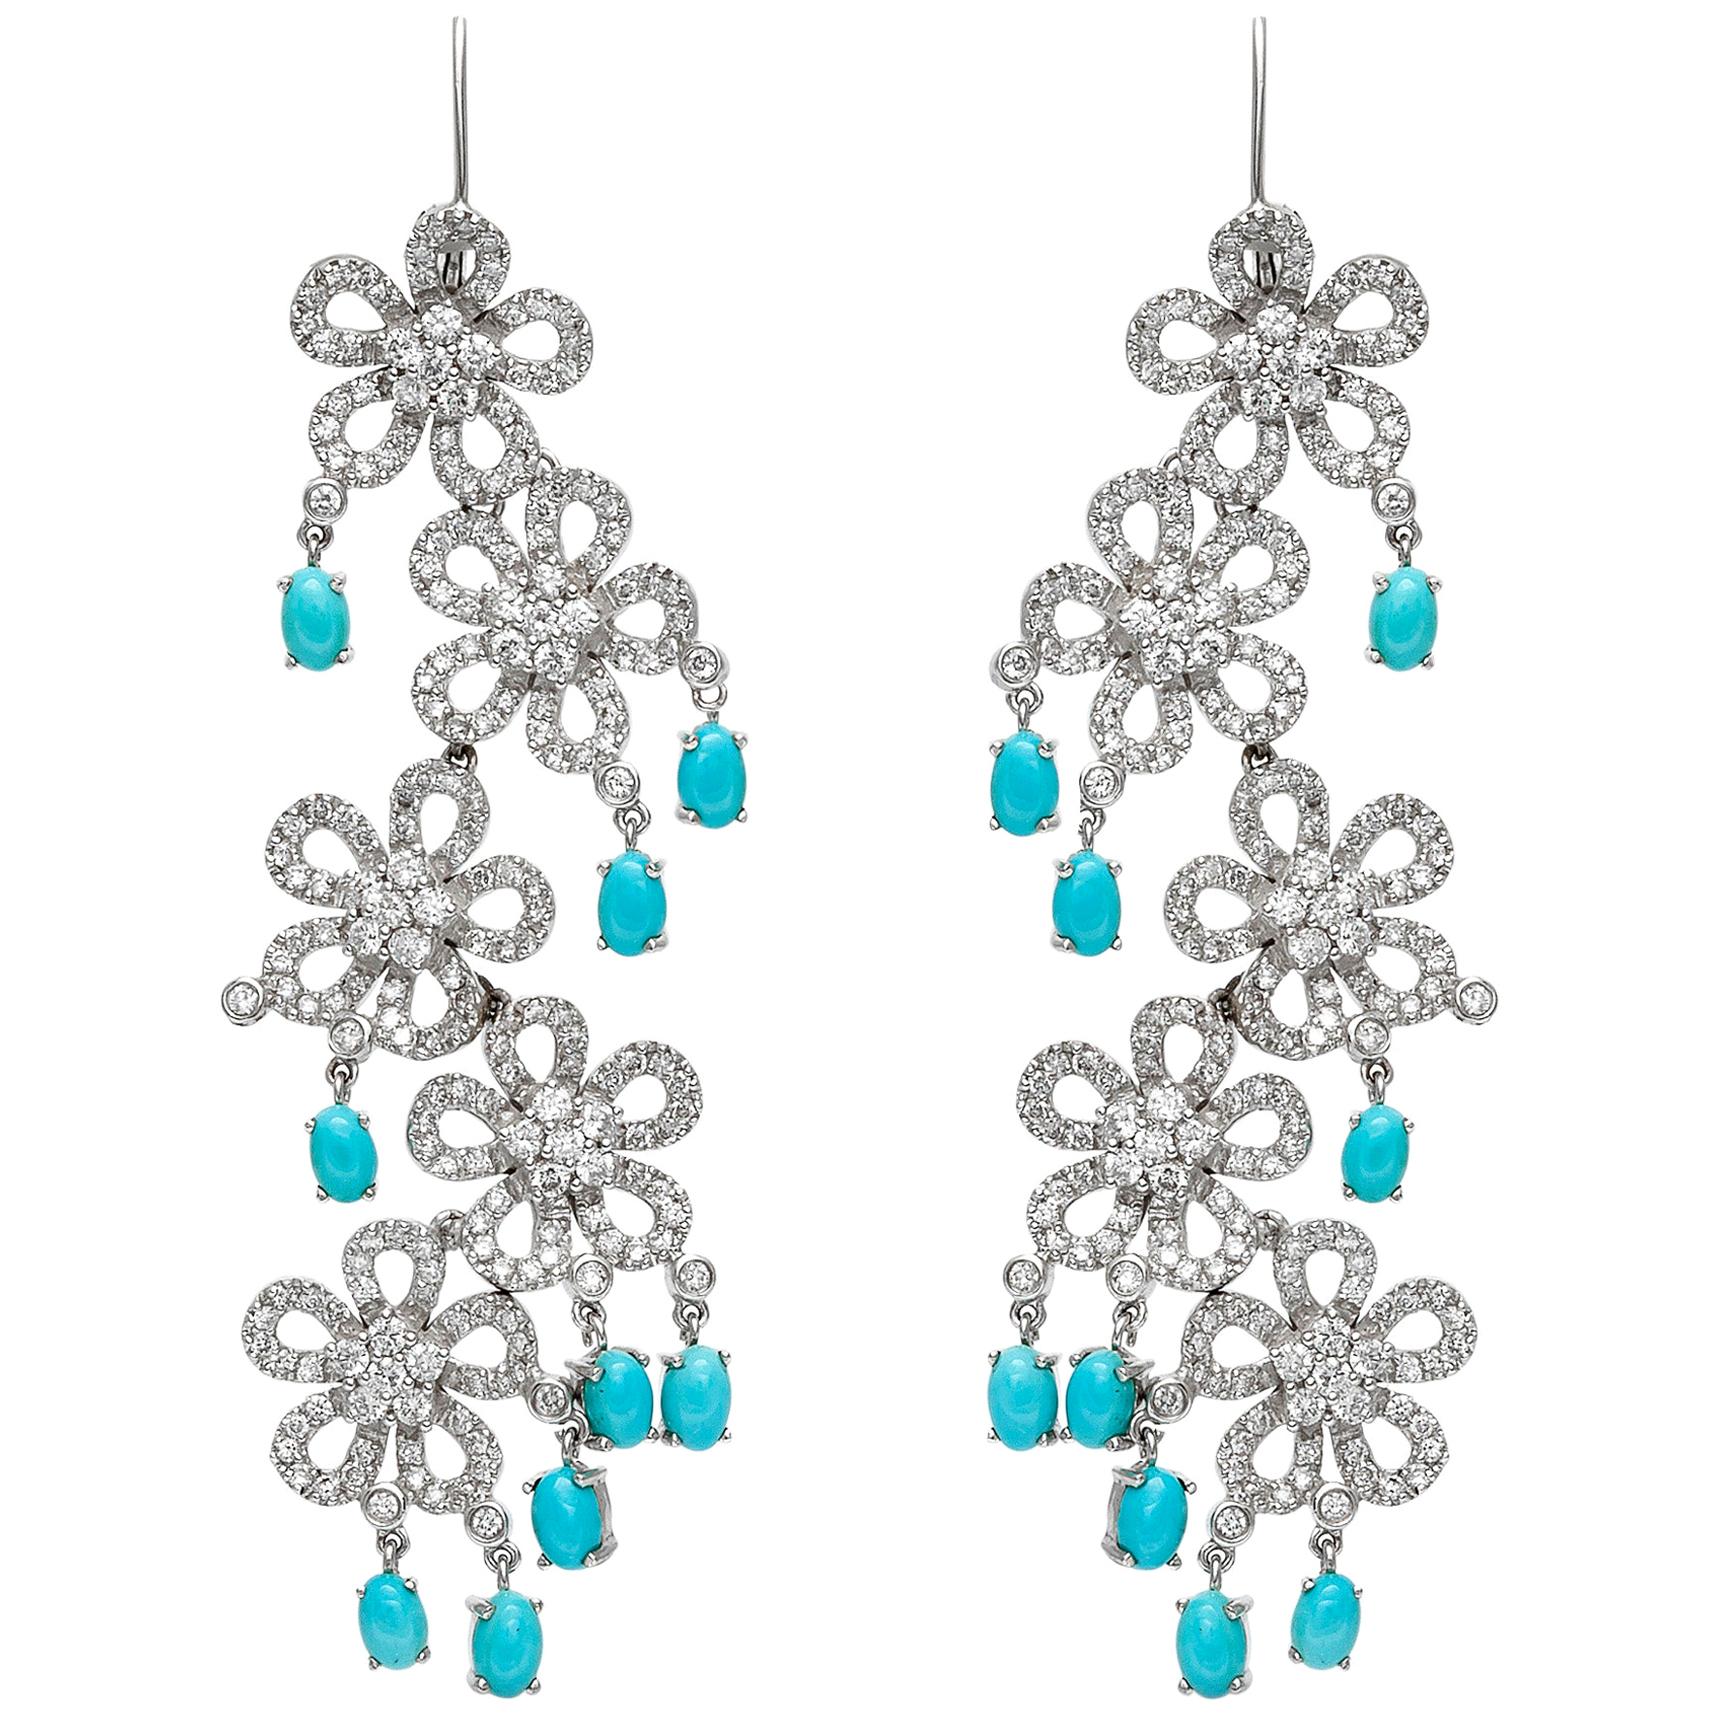 Flower Dangle Earrings with Diamonds and Turquoise